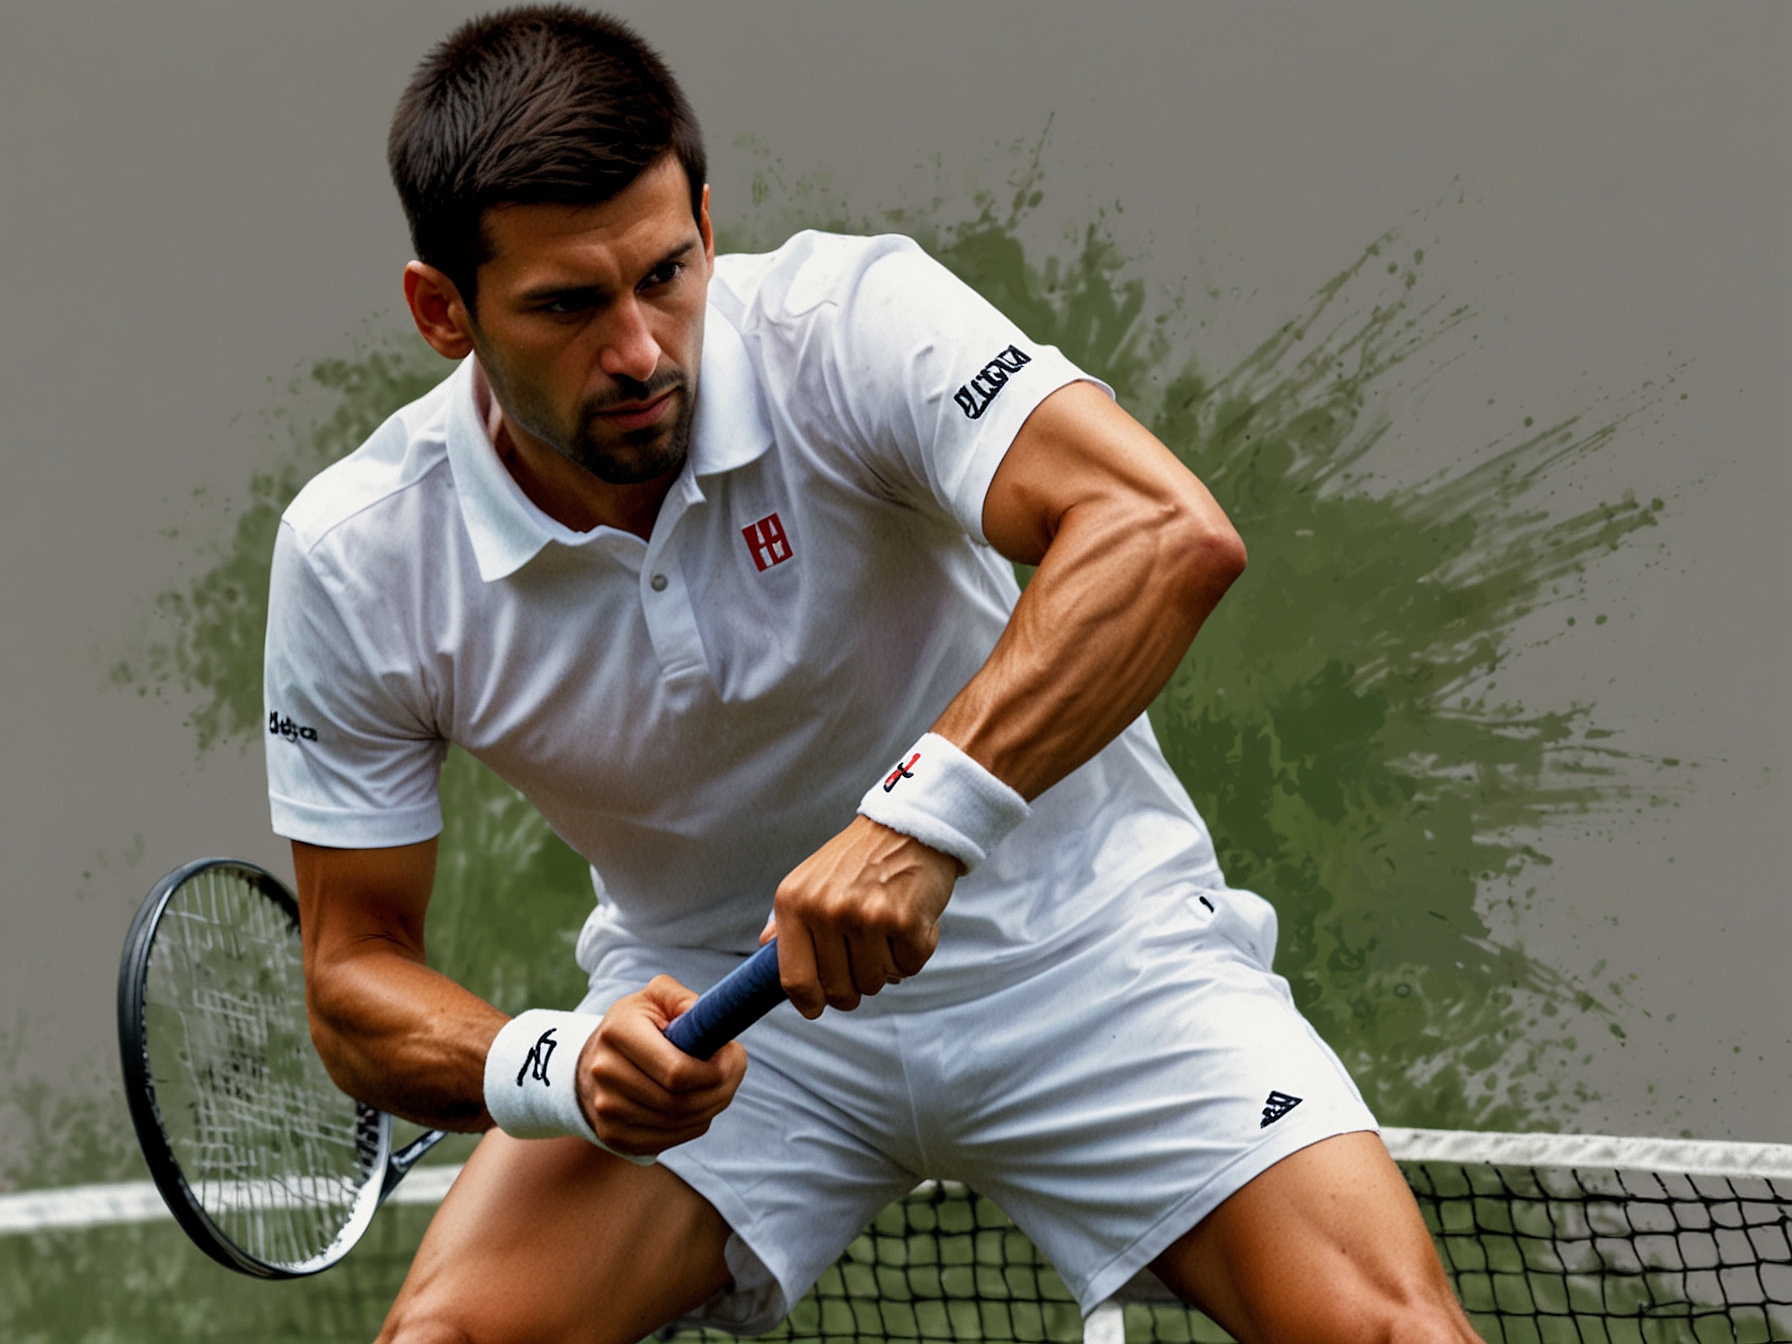 Image of Novak Djokovic practicing on a grass court, demonstrating his intensive training routines and physical preparations ahead of the Wimbledon tournament.